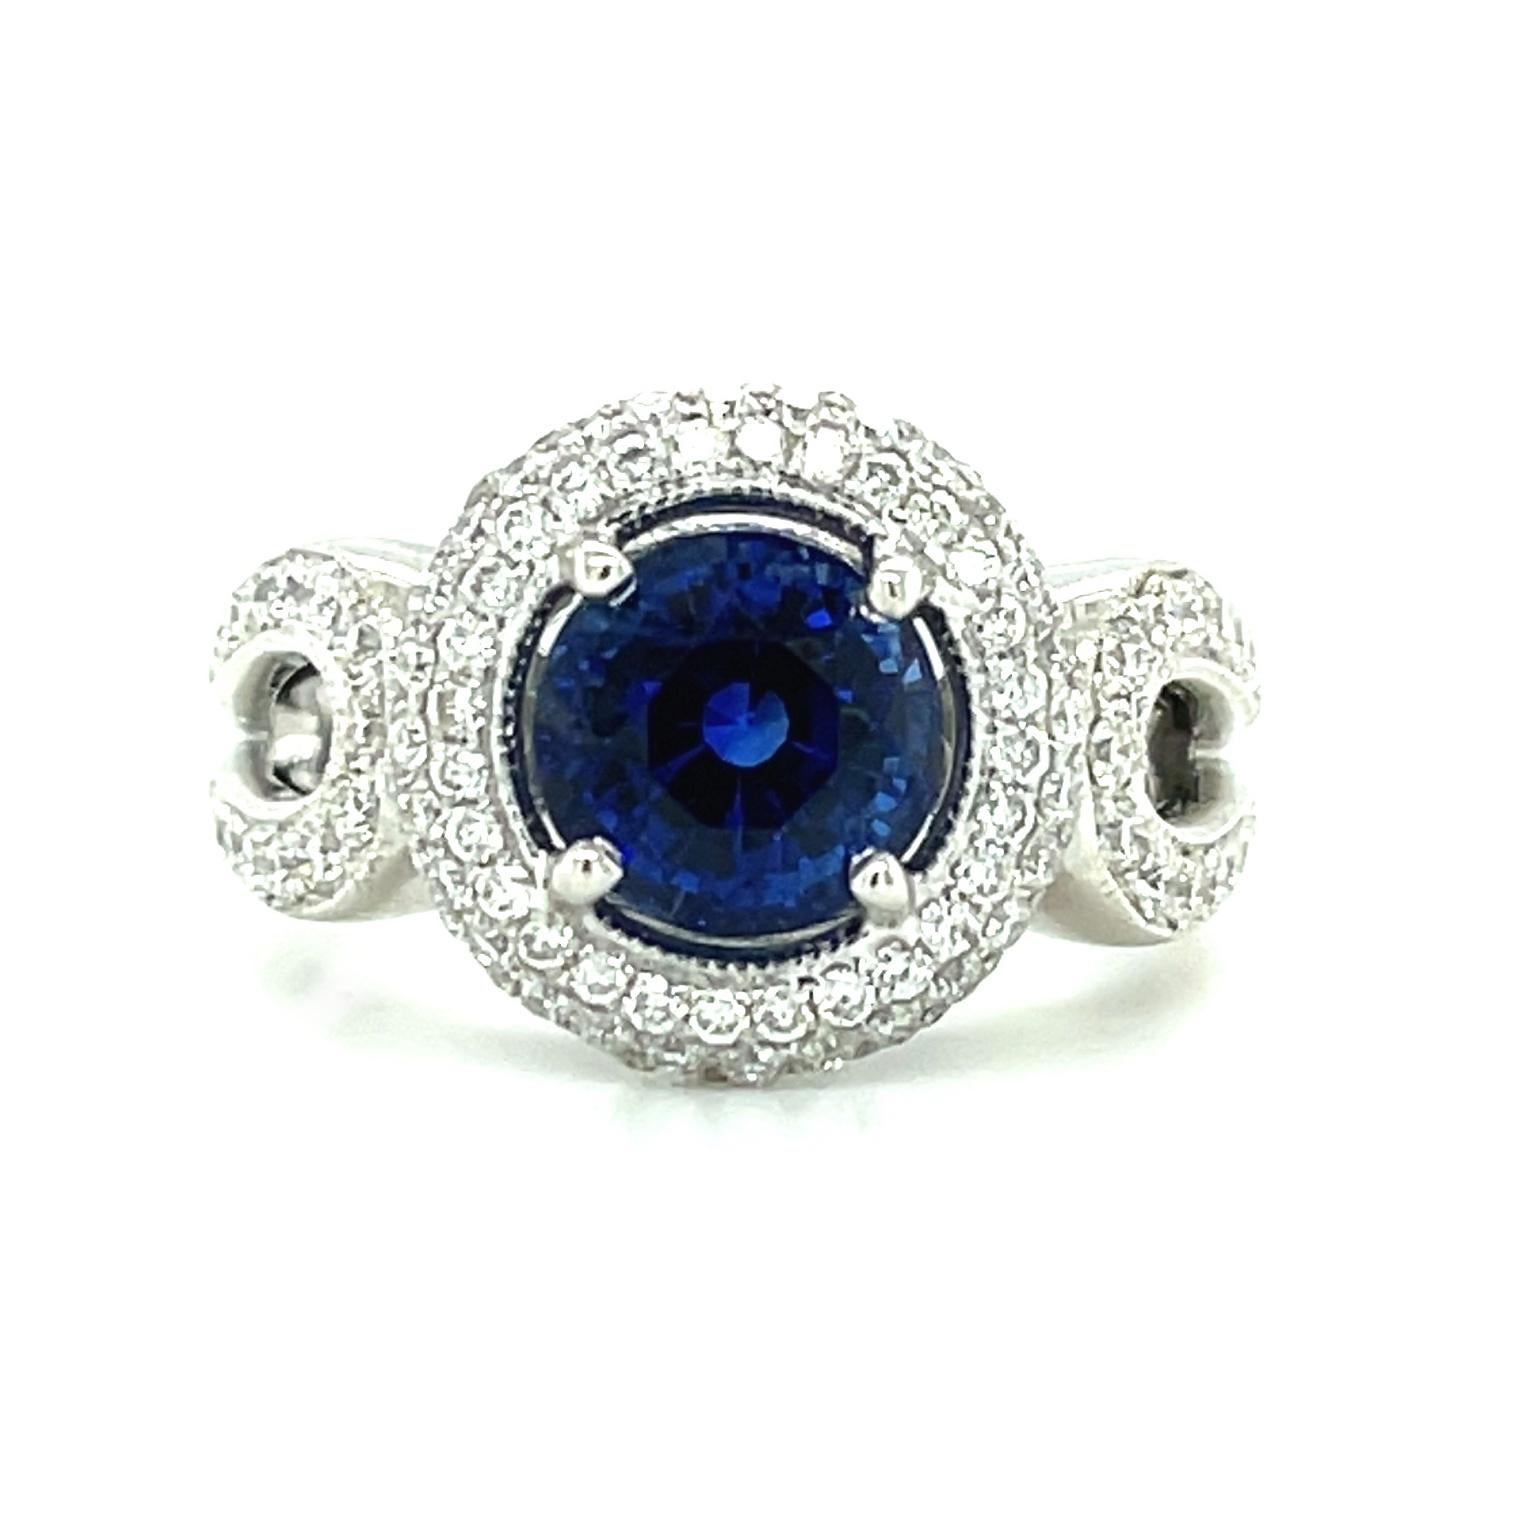 This gorgeous sapphire and diamond cocktail ring features a stunning Madagascar blue sapphire with exquisite color! The sapphire is a brilliant gem weighing 3.29 carats and is accompanied by GIA report #2141858282 certifying its origin as